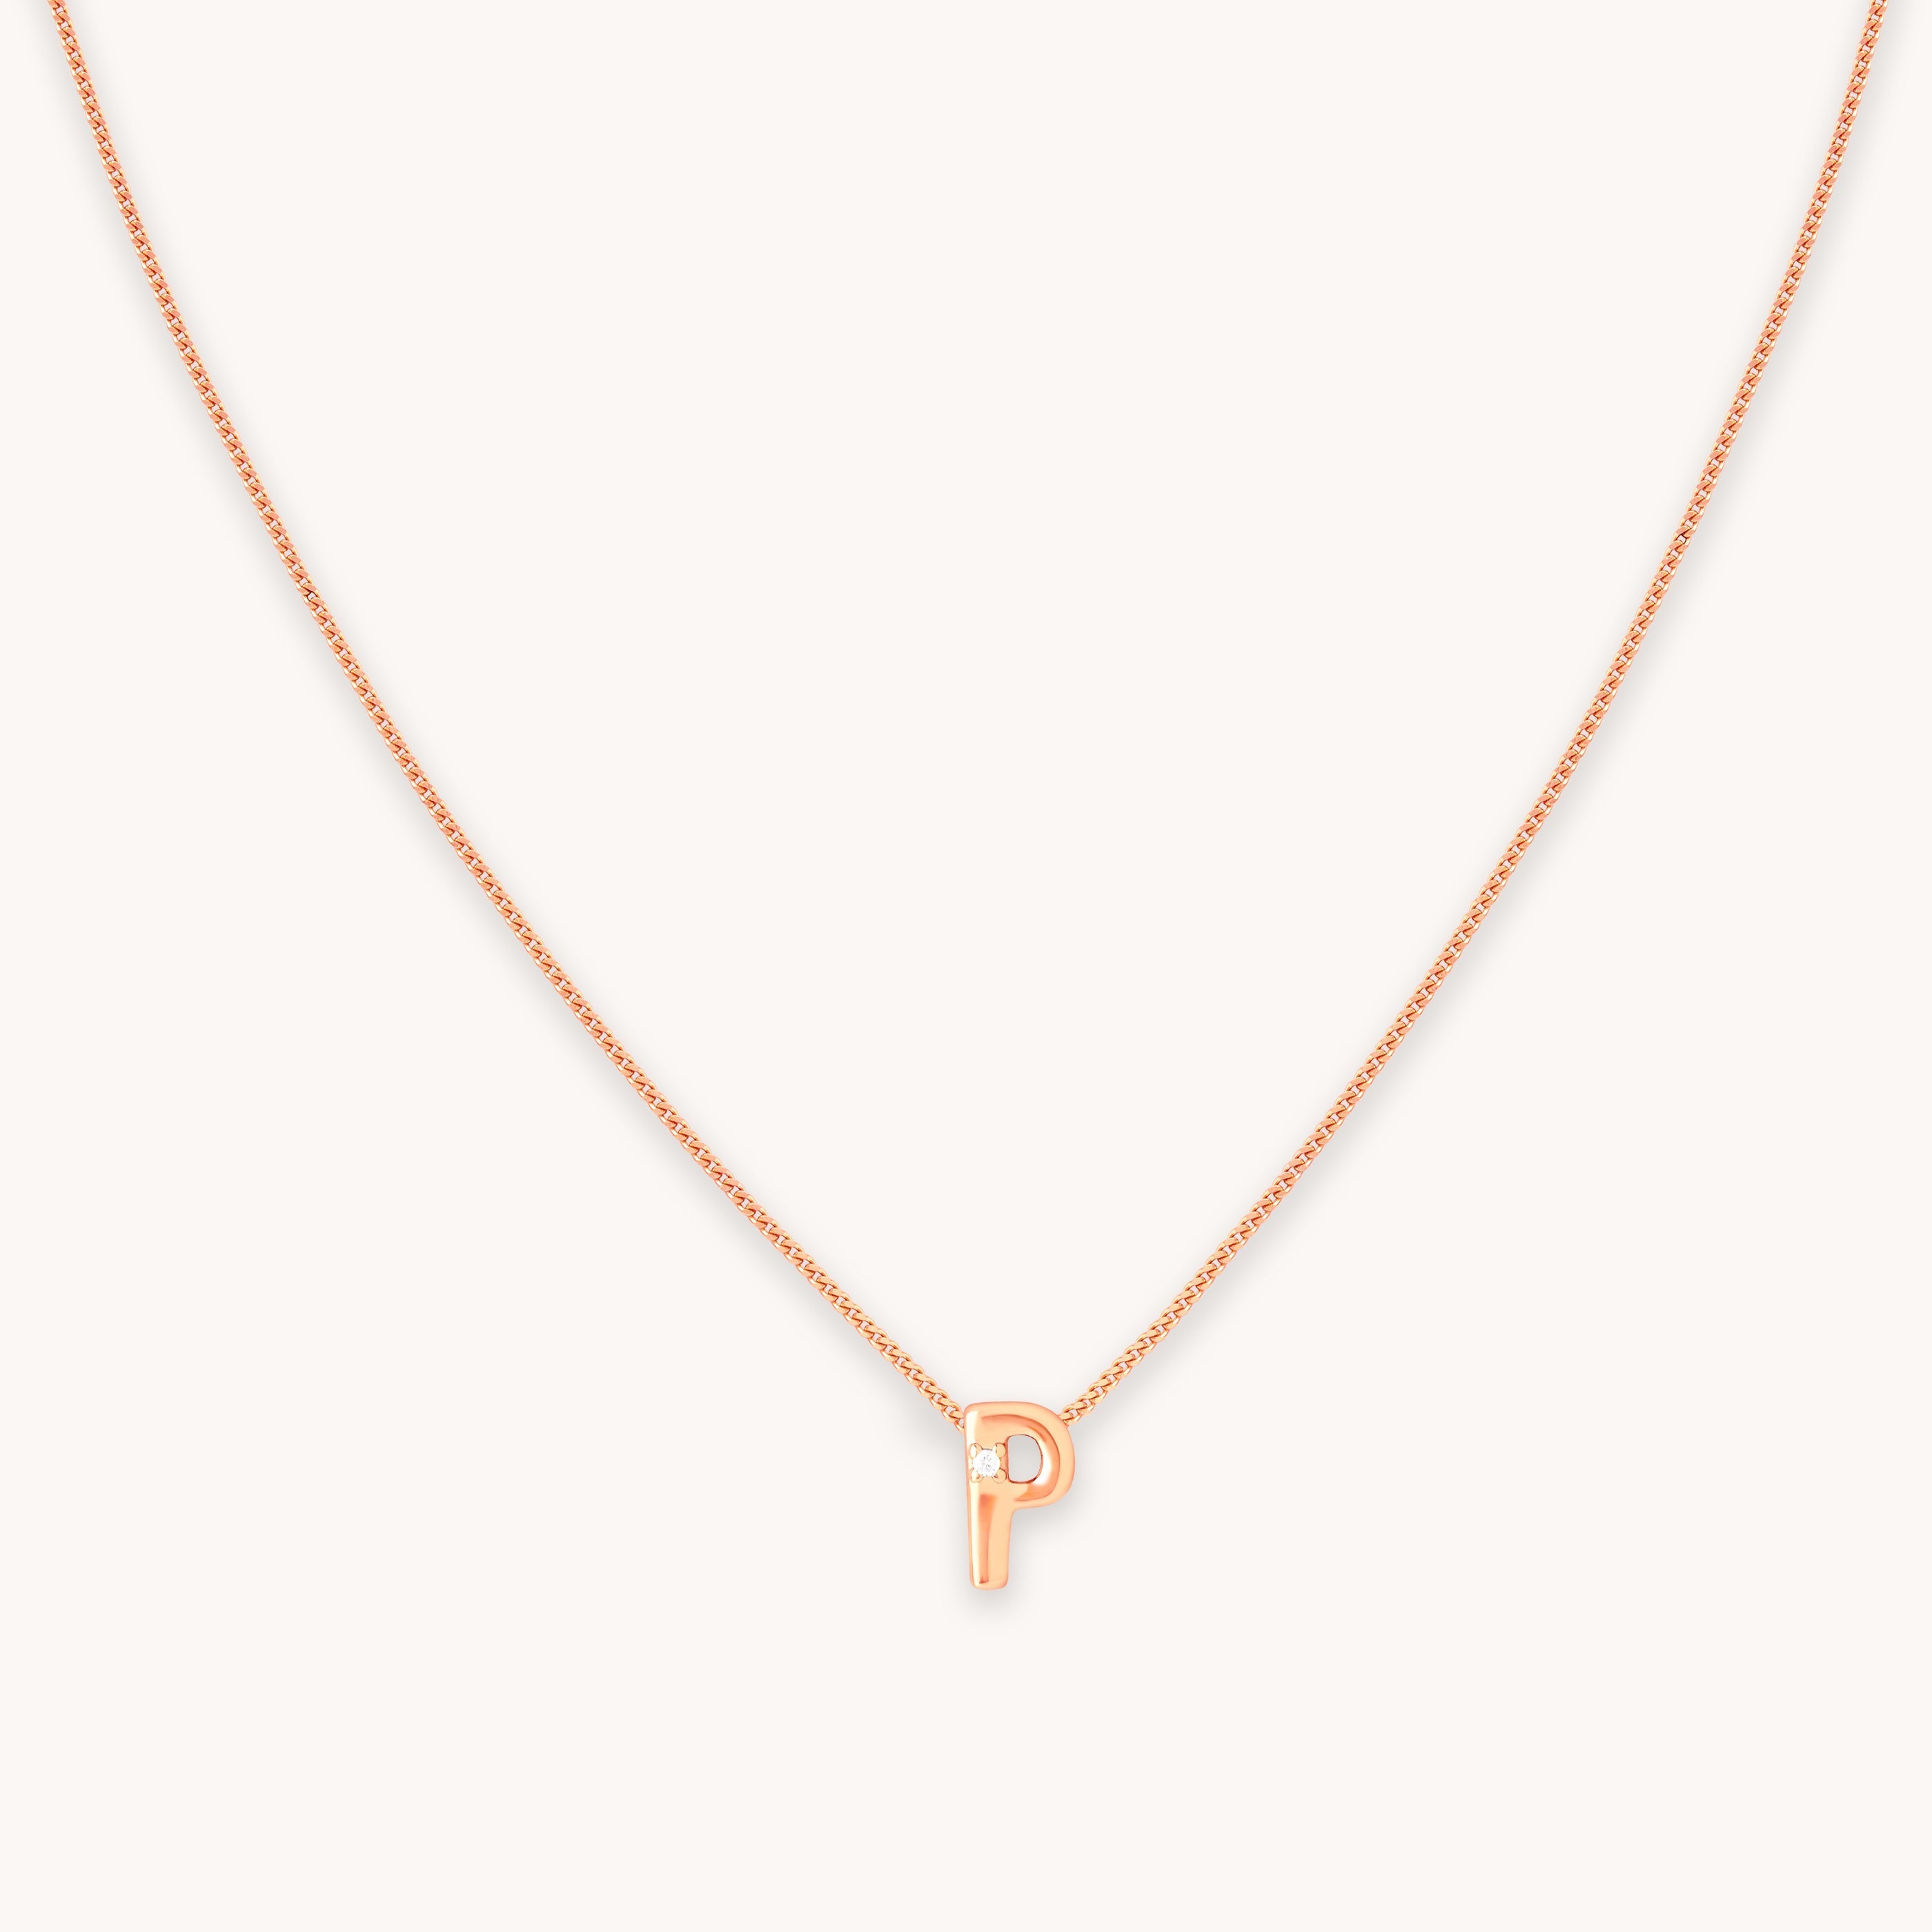 P Initial Pendant Necklace in Rose Gold